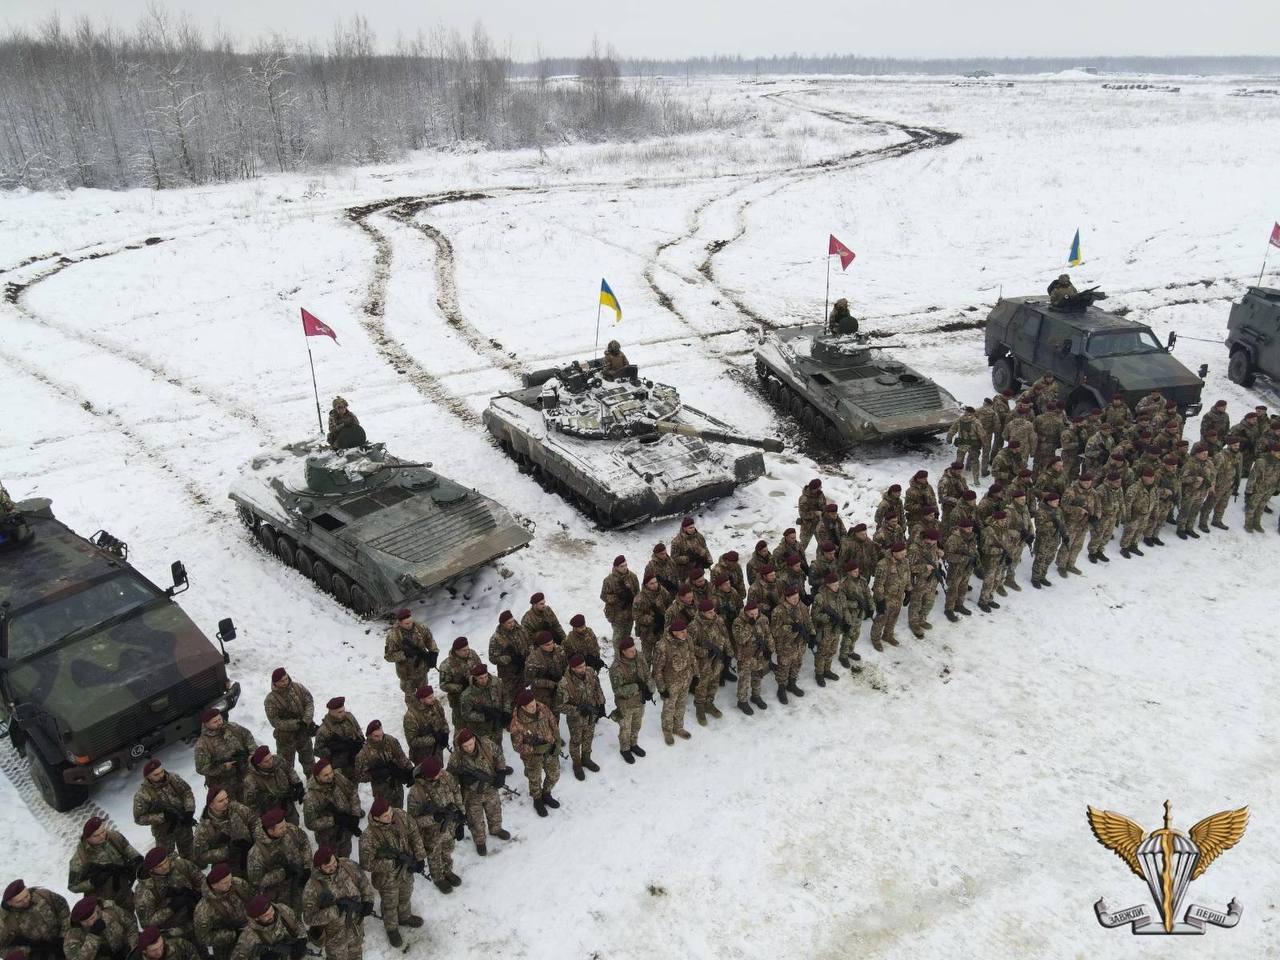 German Dingo vehicles among the other armored equipment of the Ukrainian Air Assault Forces